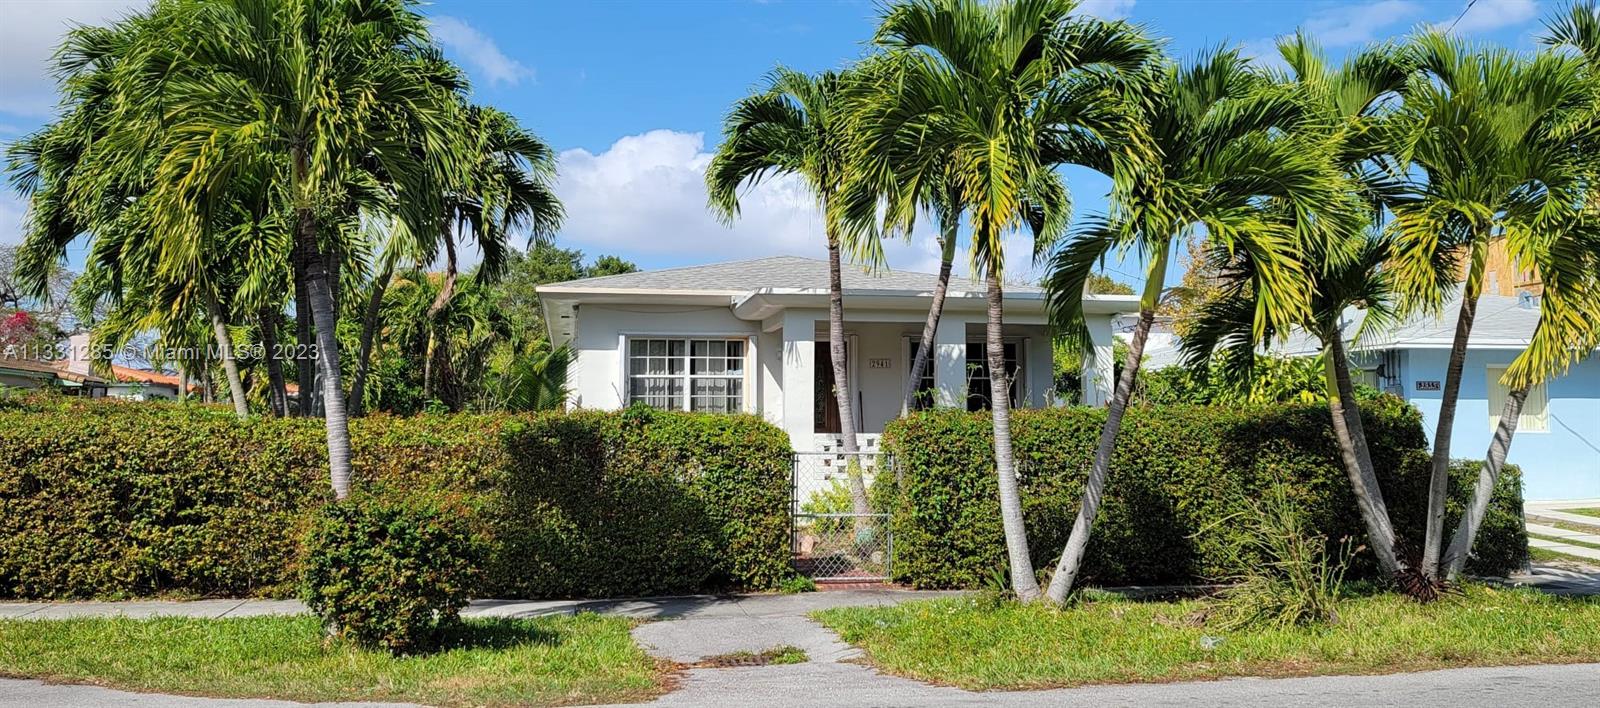 This single-family corner home features 3 bedrooms and 2 baths, located in a desirable area, close to Coral Gables, Coconut Grove, Downtown, Brickell, major city attractions, shops, restaurants, good schools, major highways and minutes away from Miami International Airport. Low Property Taxes, No HOA. Easy to show by appointment only. Contact Listing Agent.